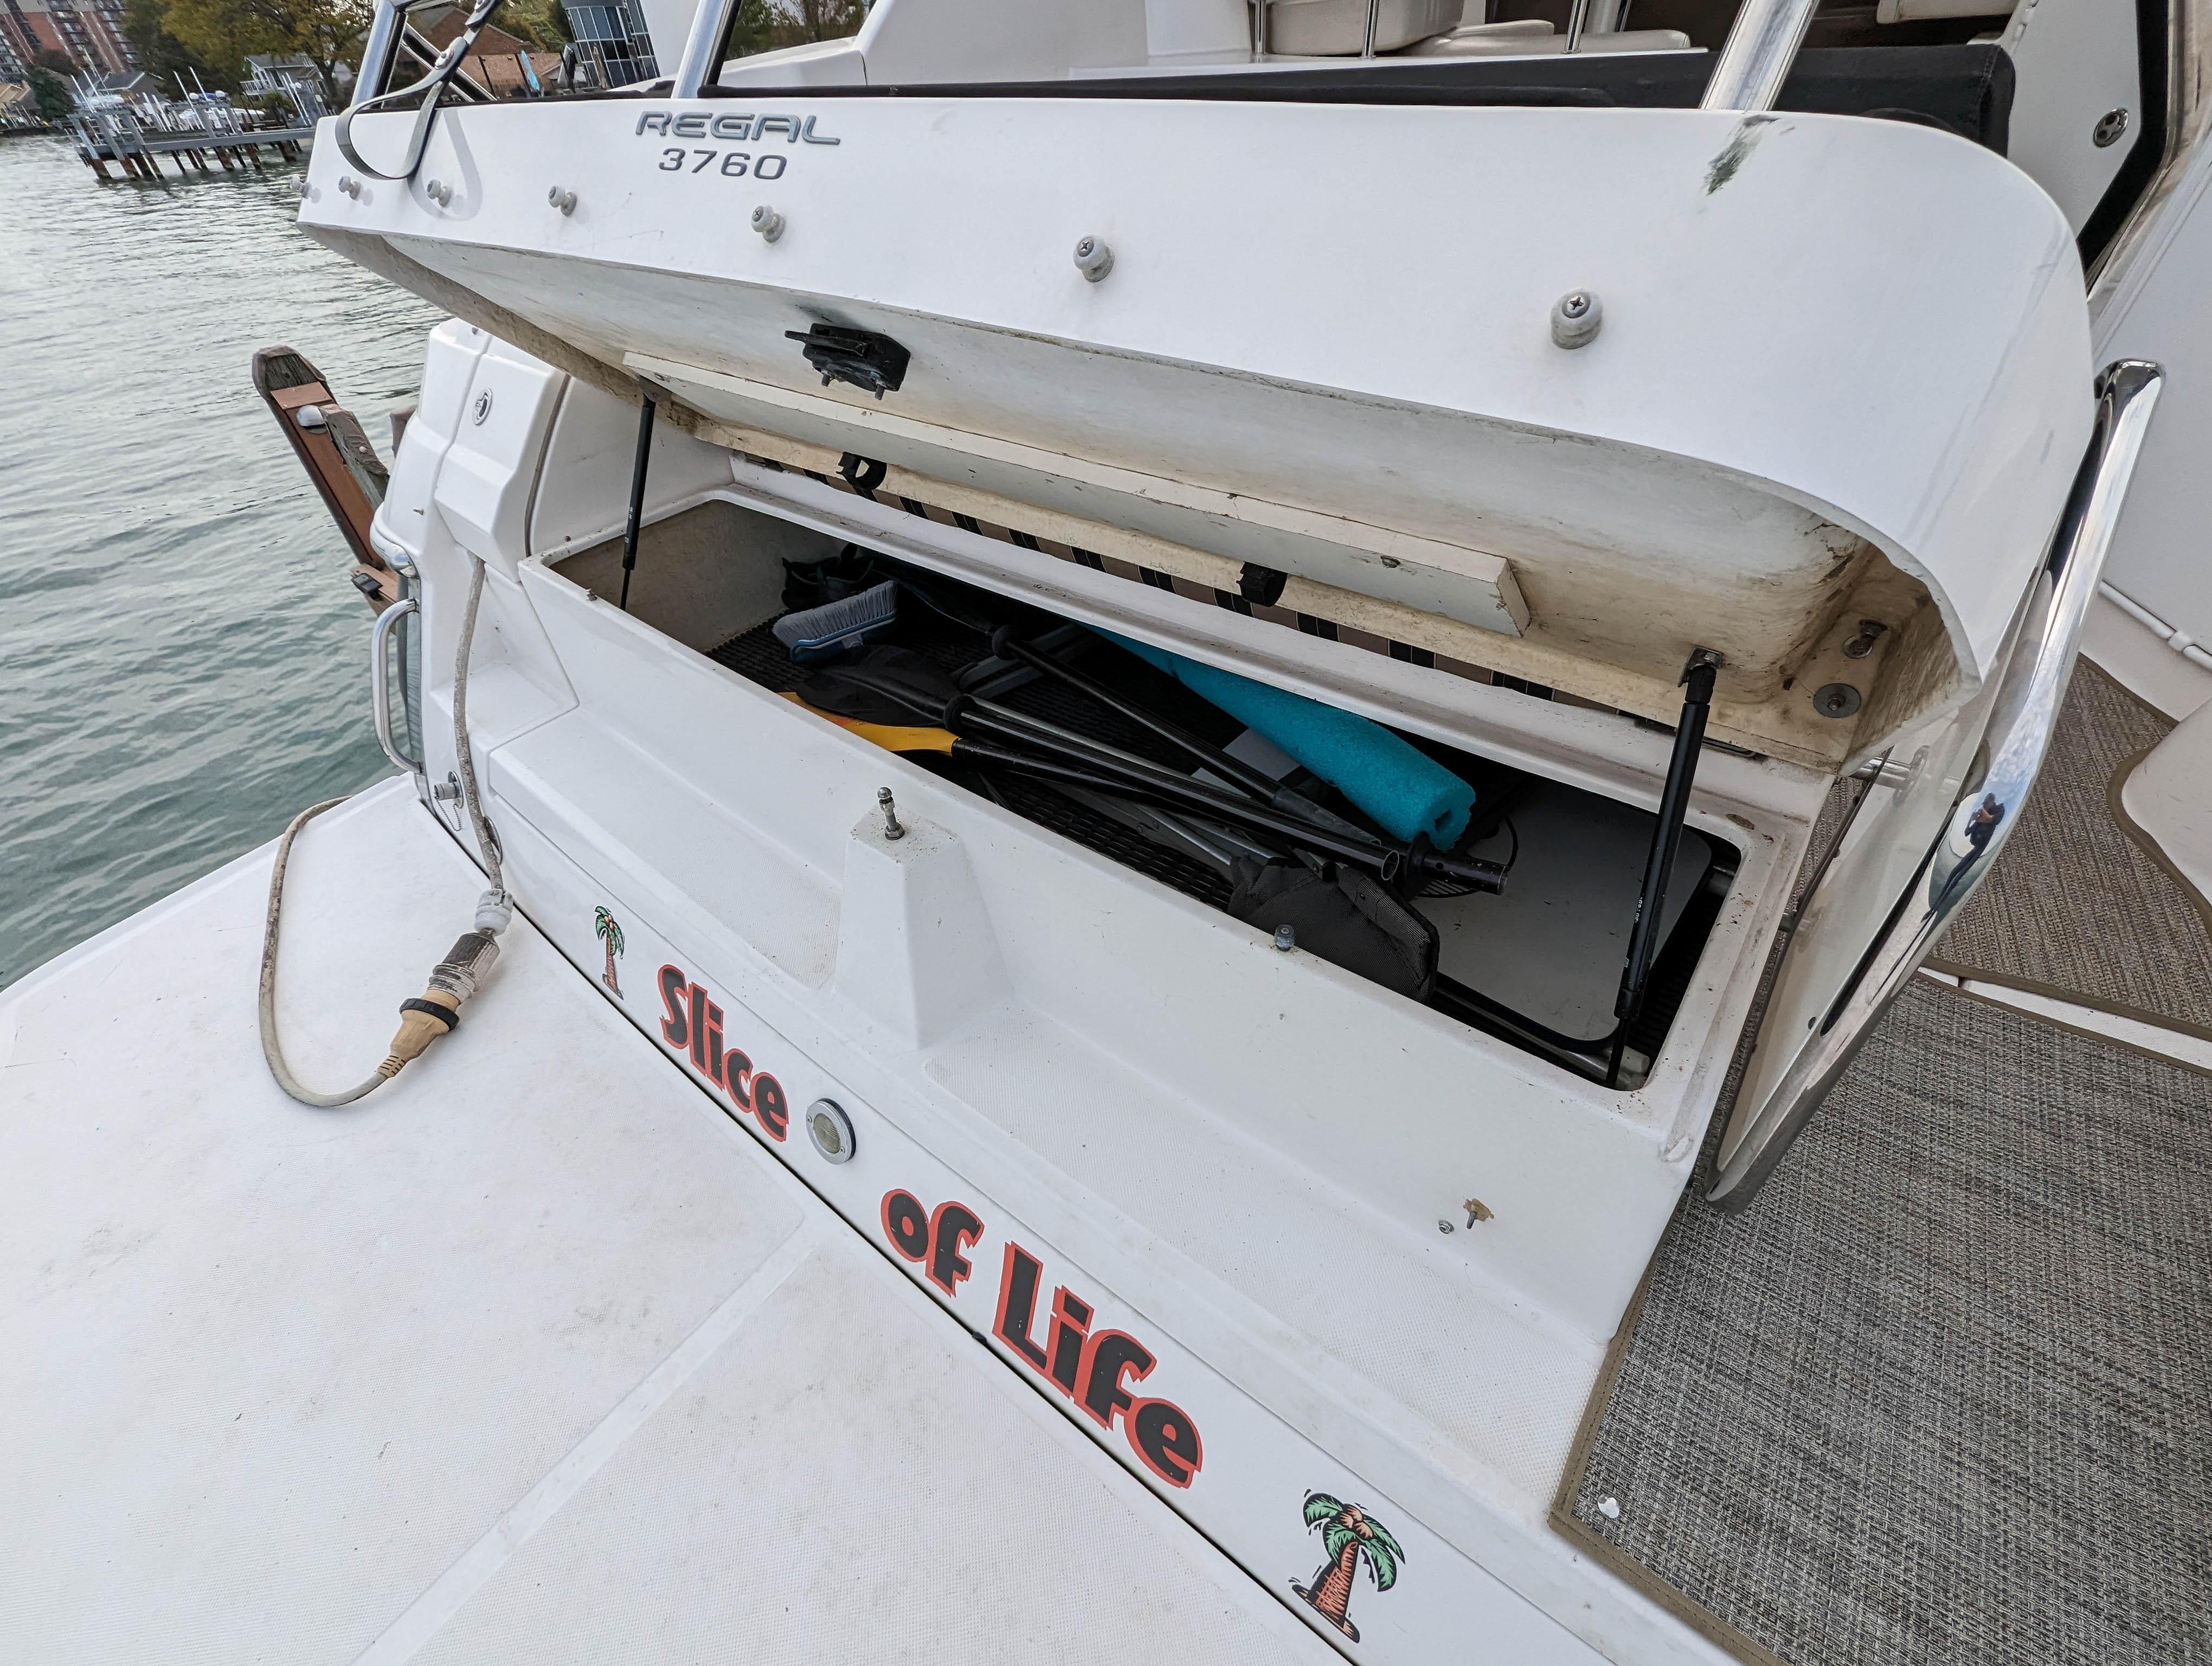 Slice Of Life Yacht for Sale, 37 Regal Yachts Windsor, Canada